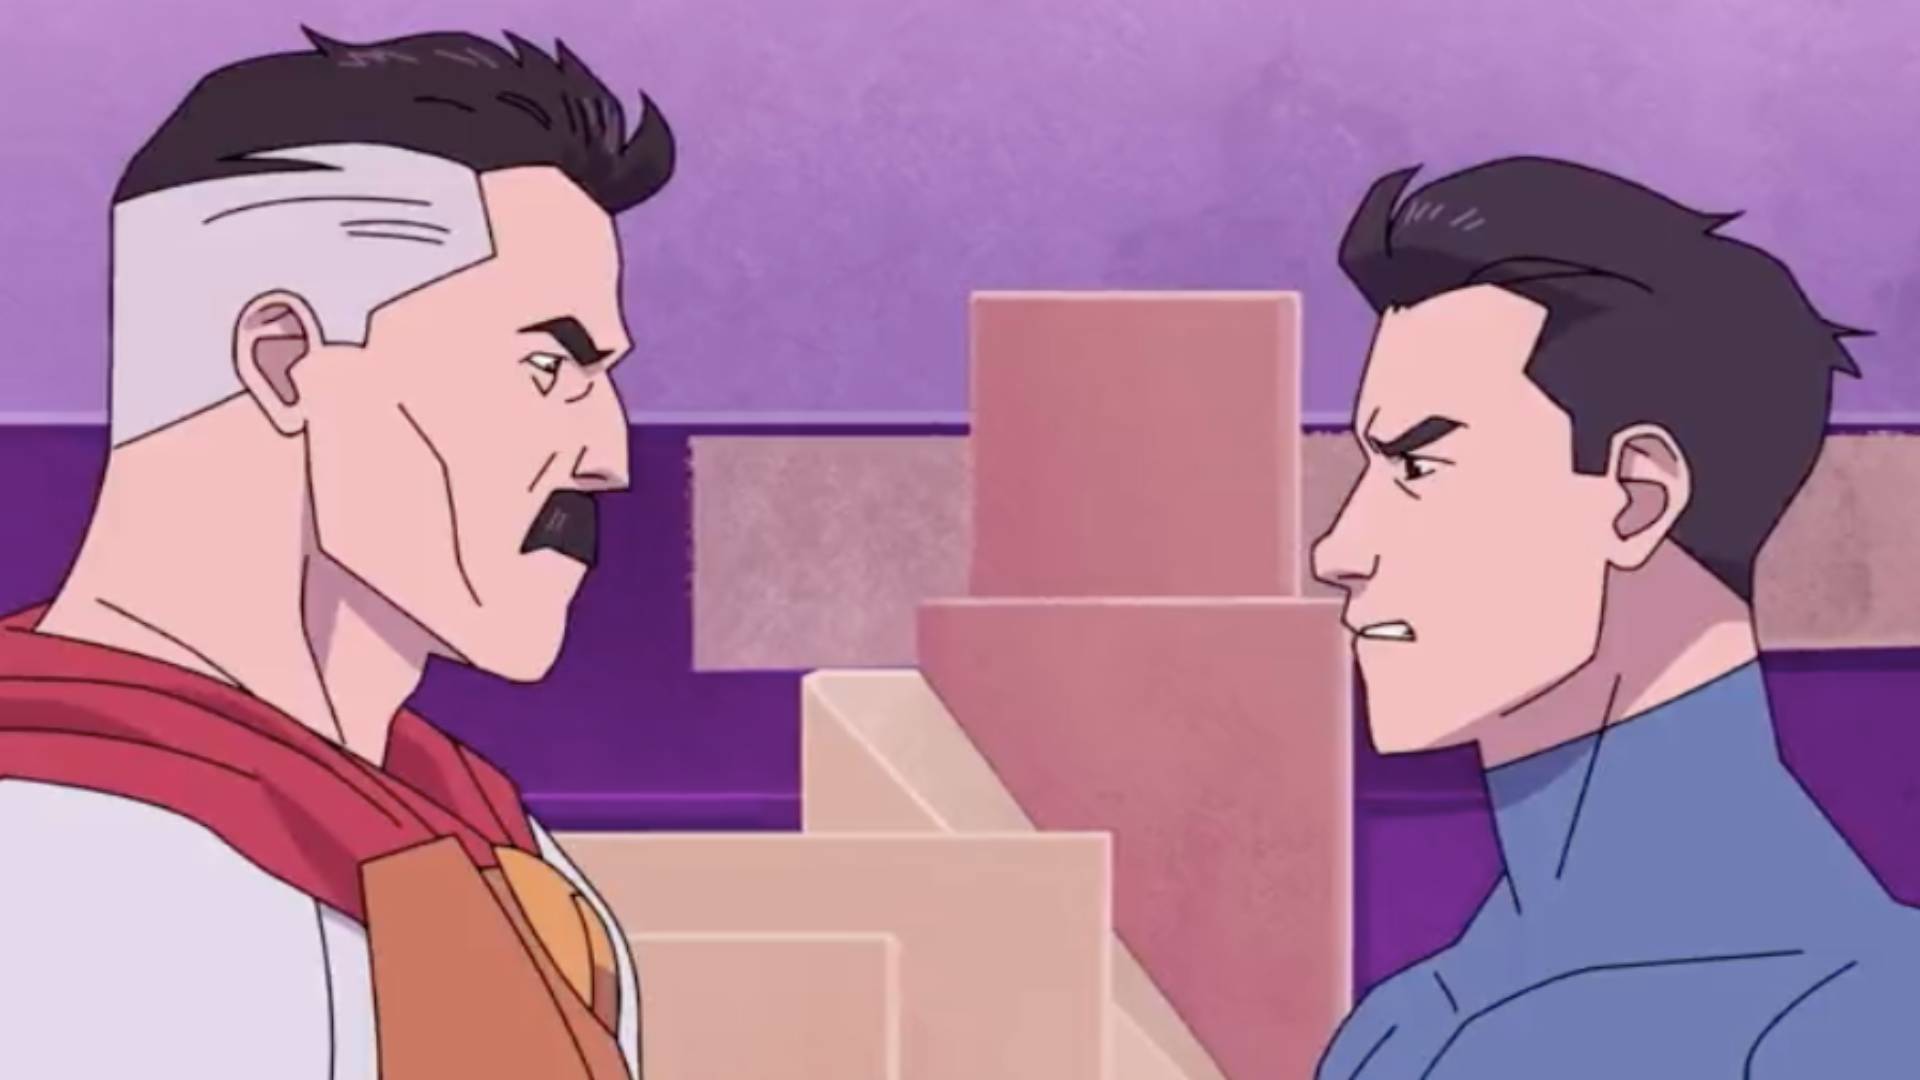 Invincible Season 2 midseason finale trailer teases a reckoning: If you  experience emotional damage, you may be entitled to compensation